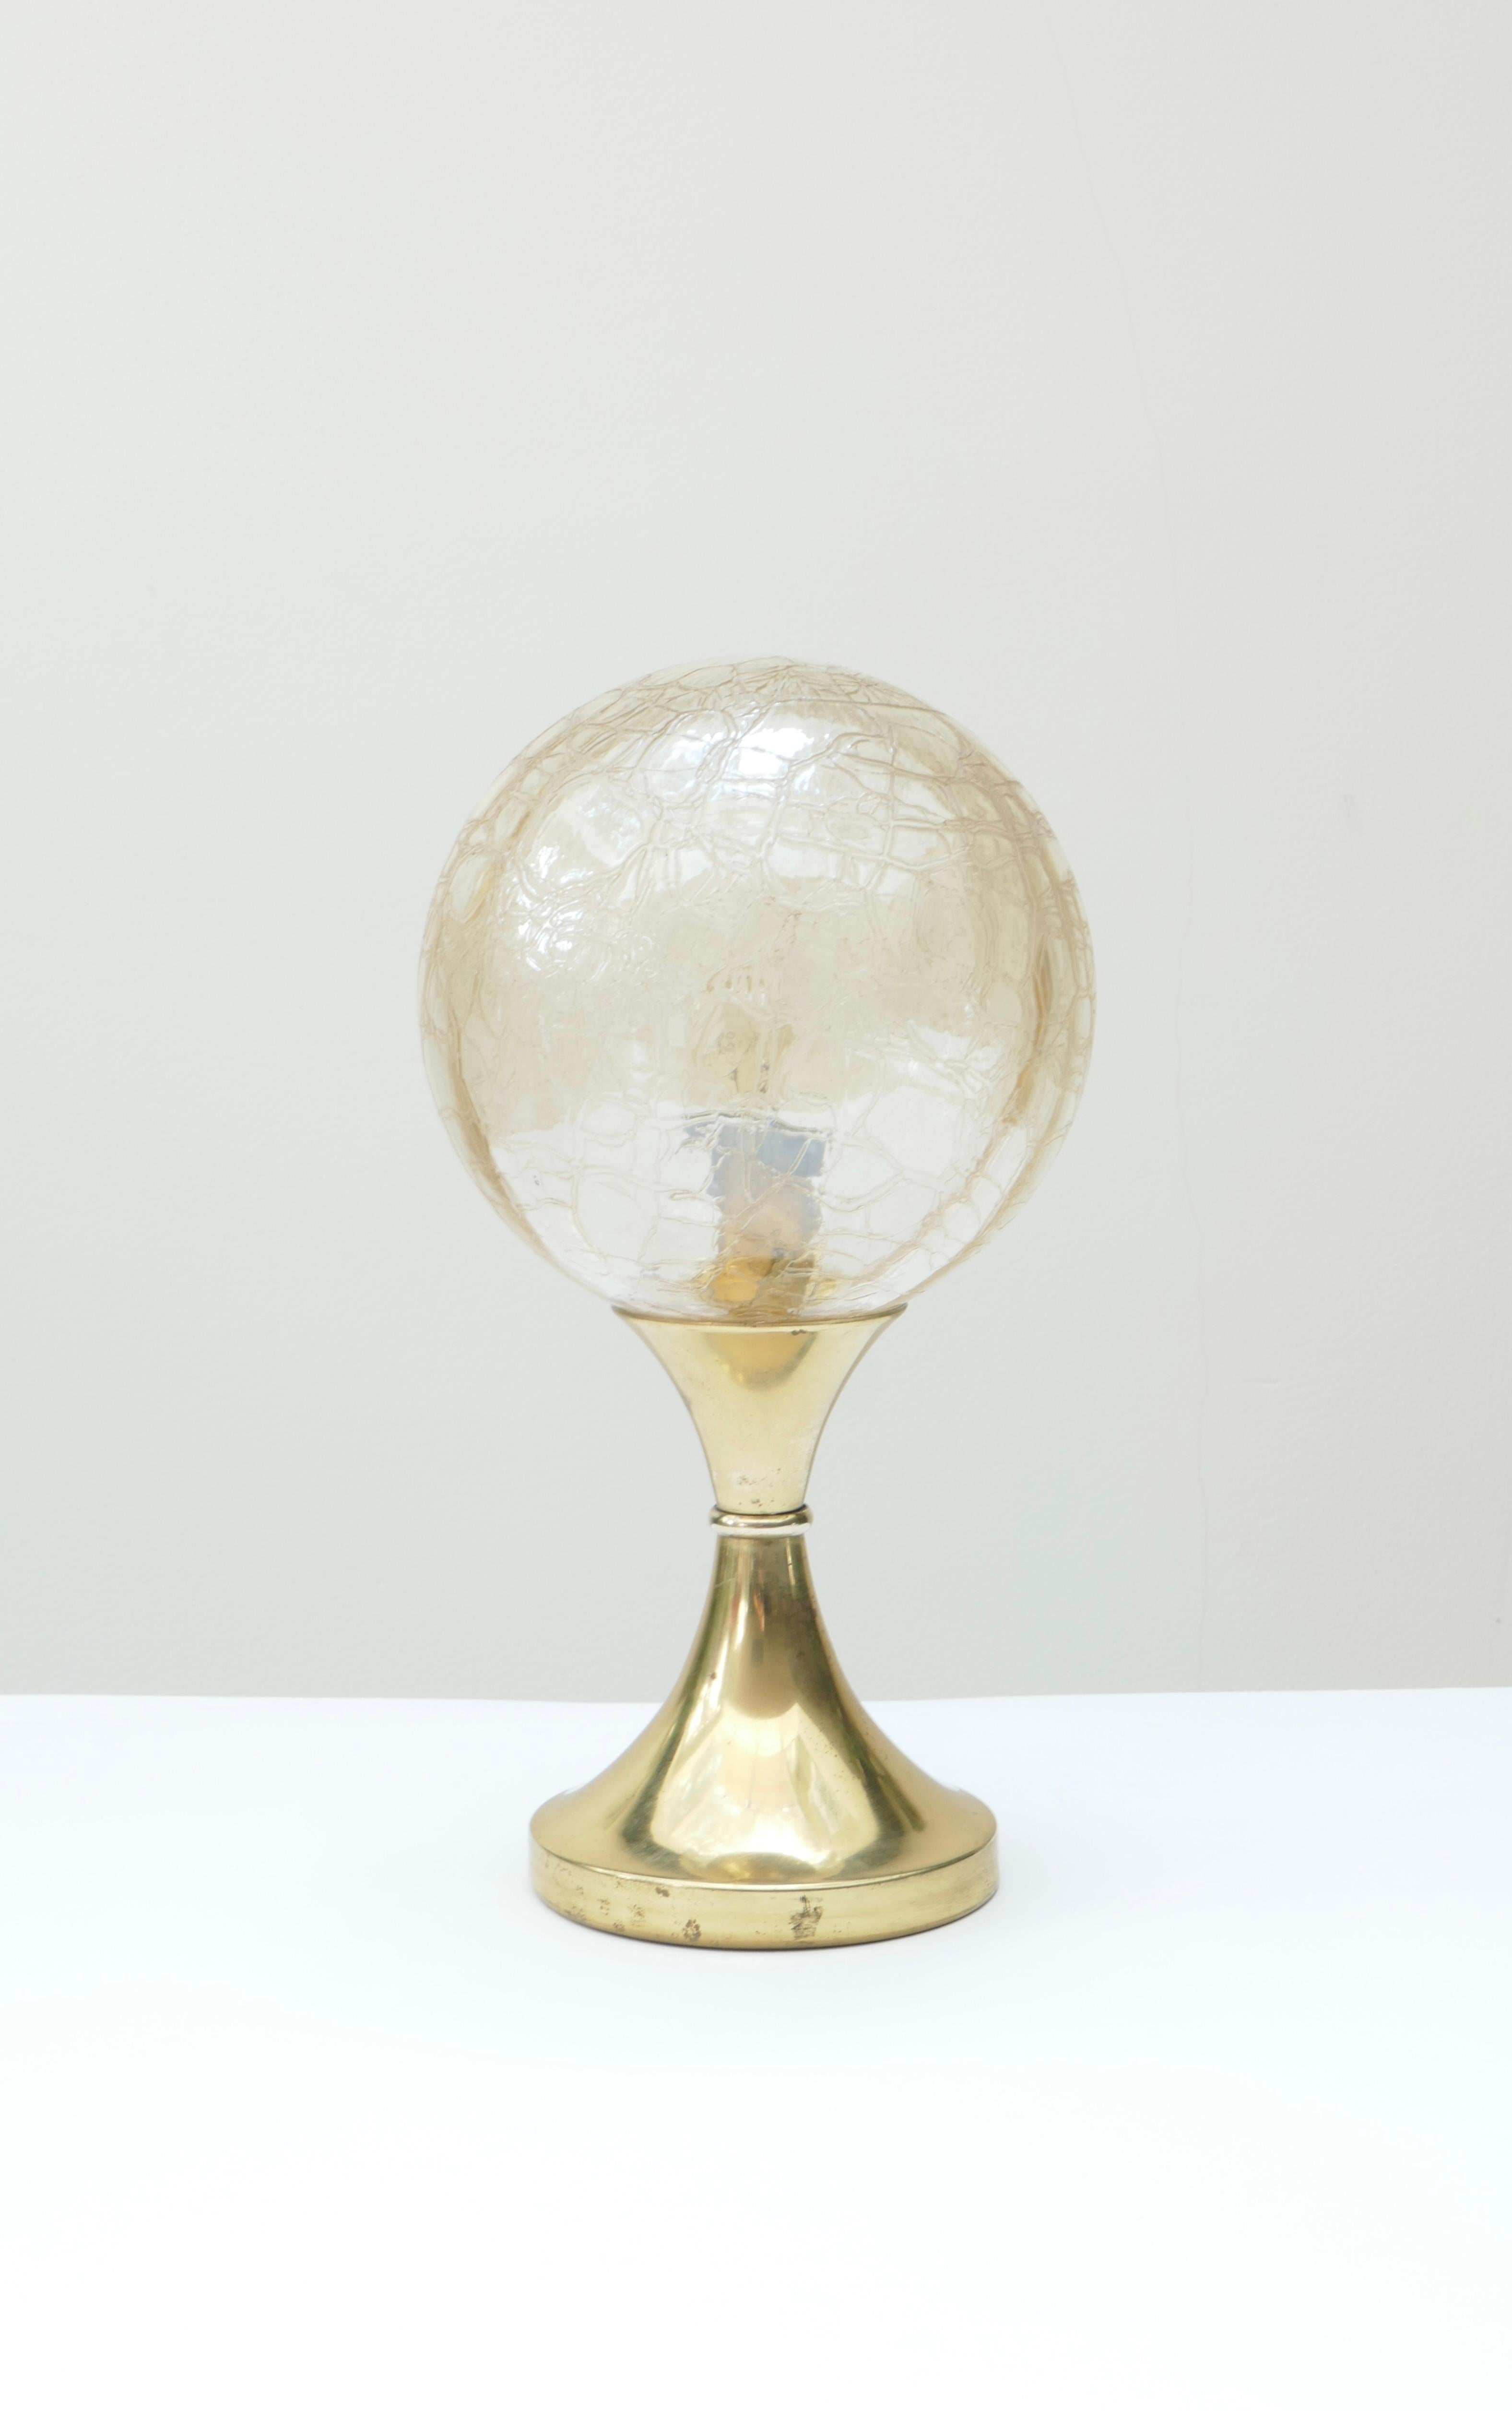 A unique small table lamp with a tulip brass base and a crackle glass globe shade that diffuses a warm light.
Unique and easy to place in any room to add light and warmth. 
Measures: Base diameter : 11 cm. 
Globe diameter : 20 cm. 
Height 29